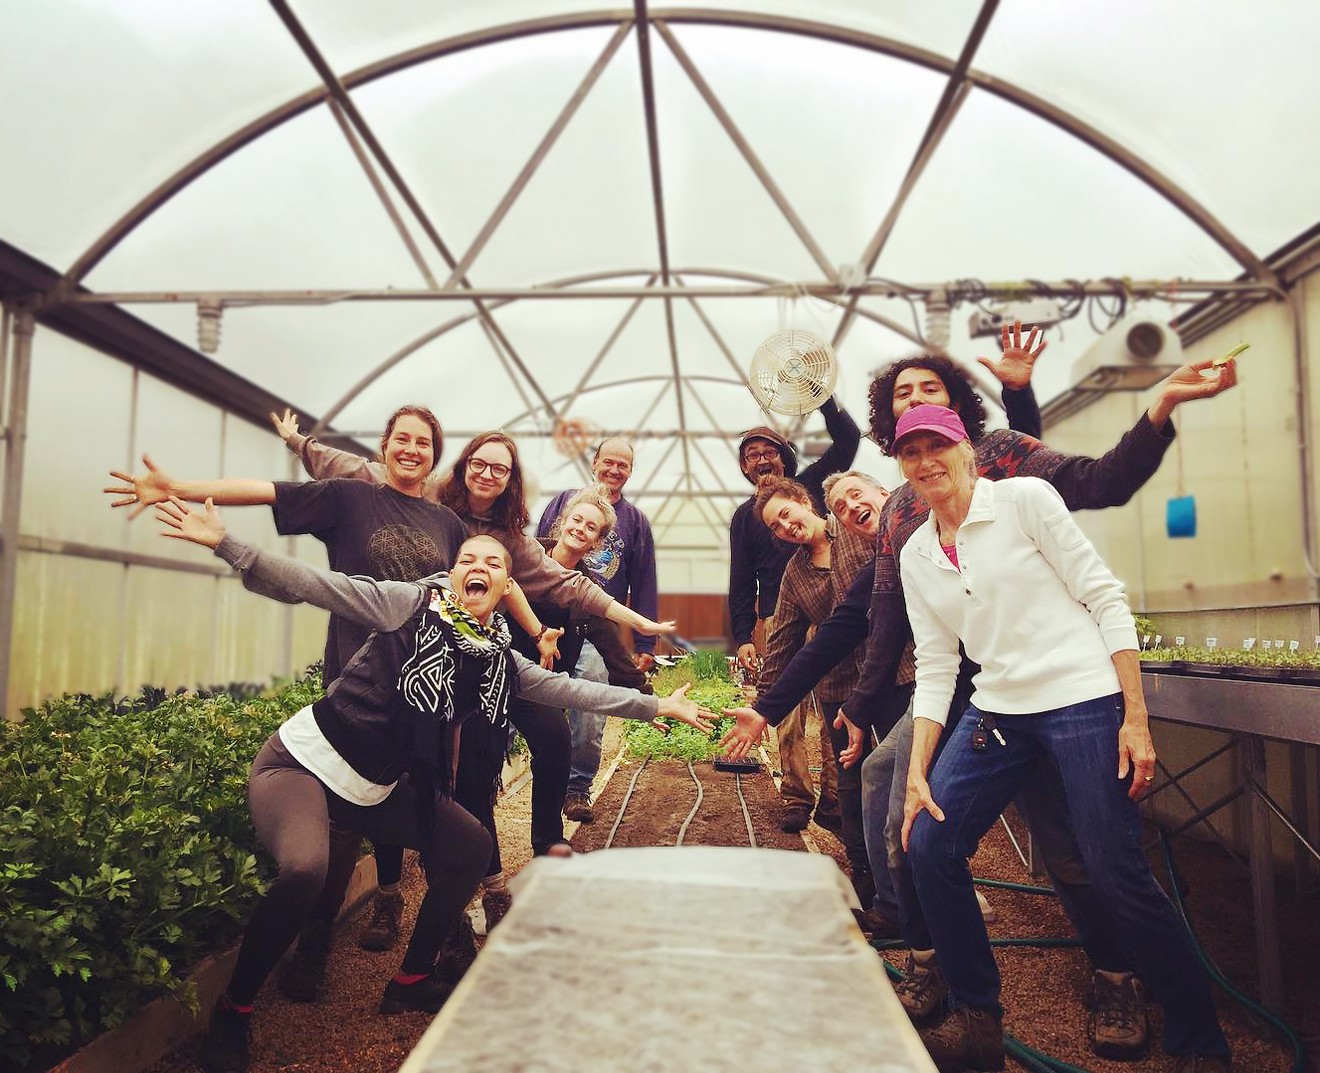 Sunrise Ranch members pose for a picture inside the property's greenhouse.